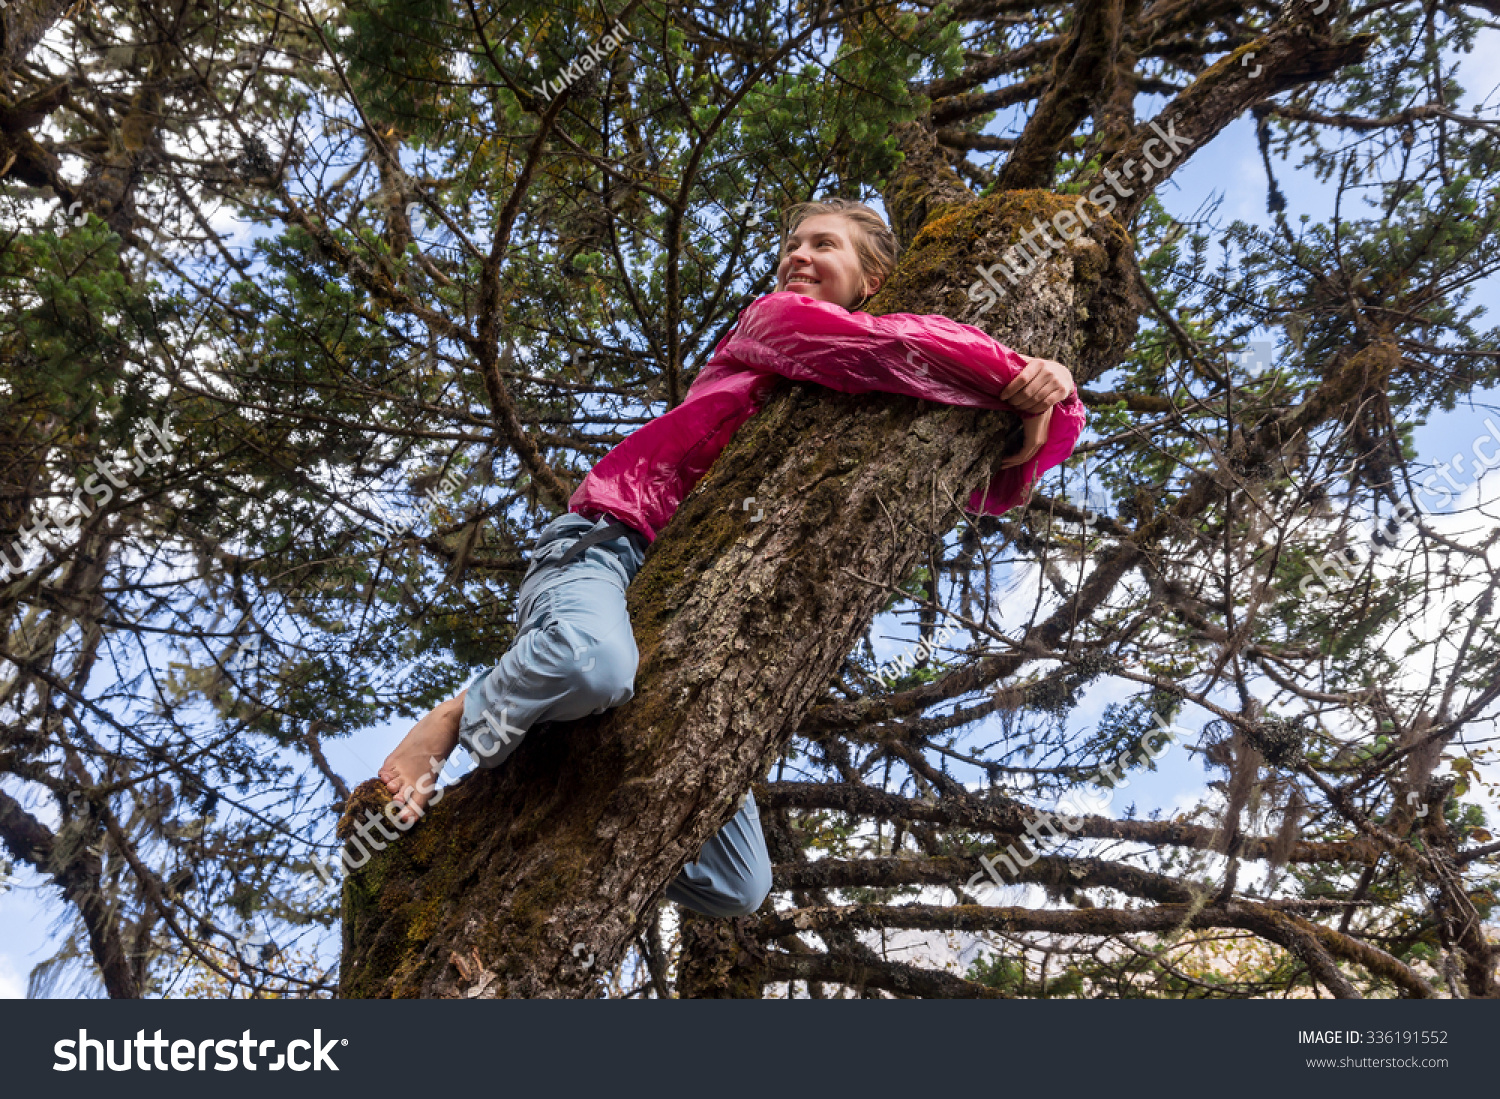 https://image.shutterstock.com/shutterstock/photos/336191552/display_1500/stock-photo-a-happy-young-girl-with-bare-feet-climbing-a-tree-336191552.jpg